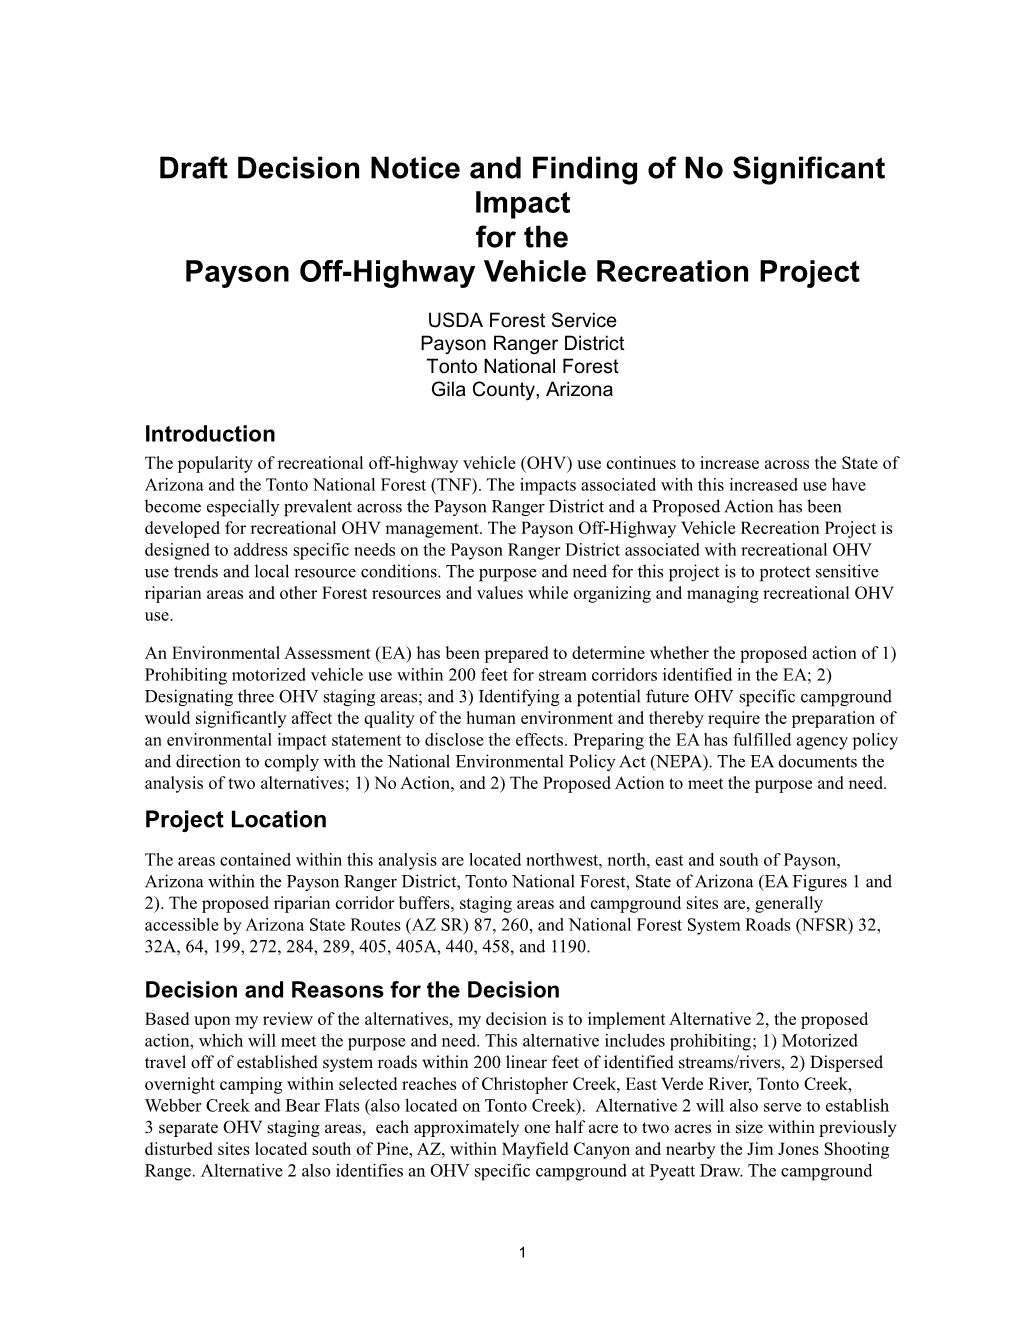 Draft Decision Notice and Finding of No Significant Impact for the Payson Off-Highway Vehicle Recreation Project